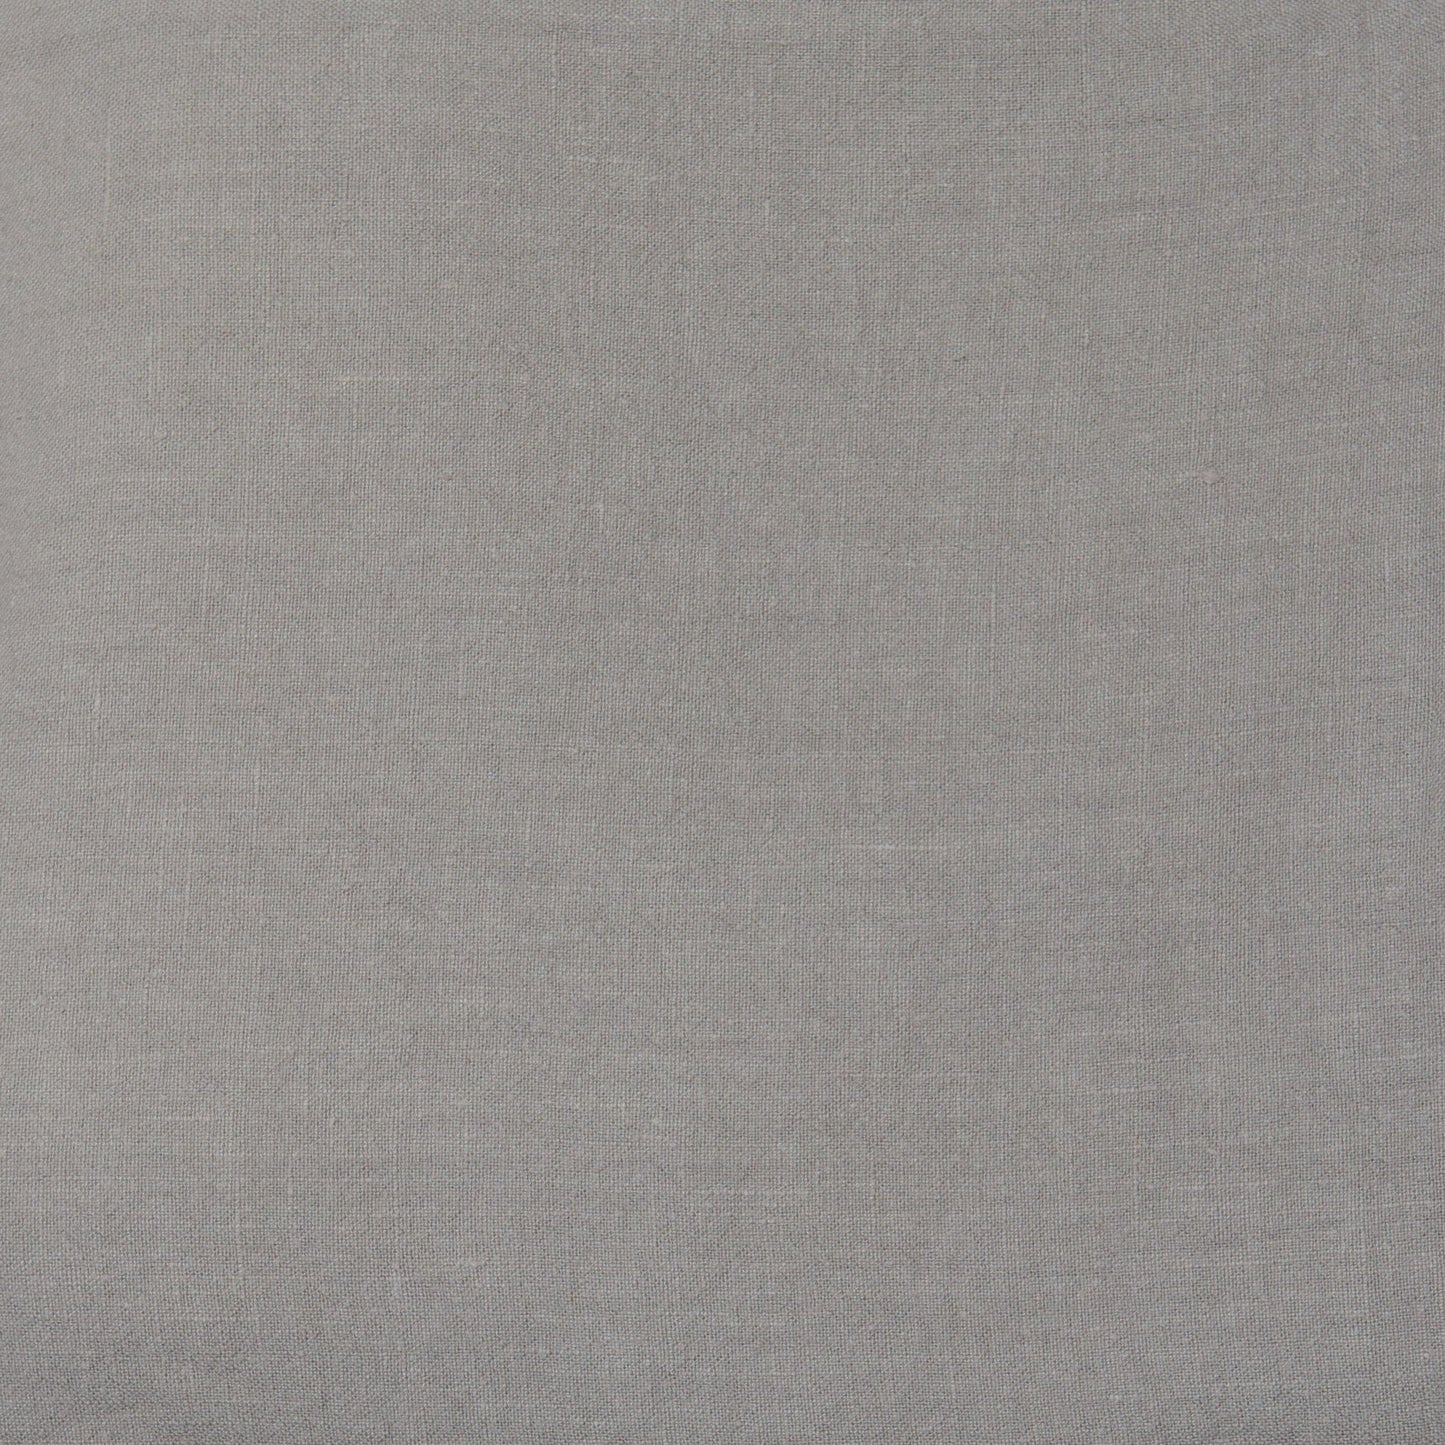 Heavy Linen Bed Cover Decor Taupe